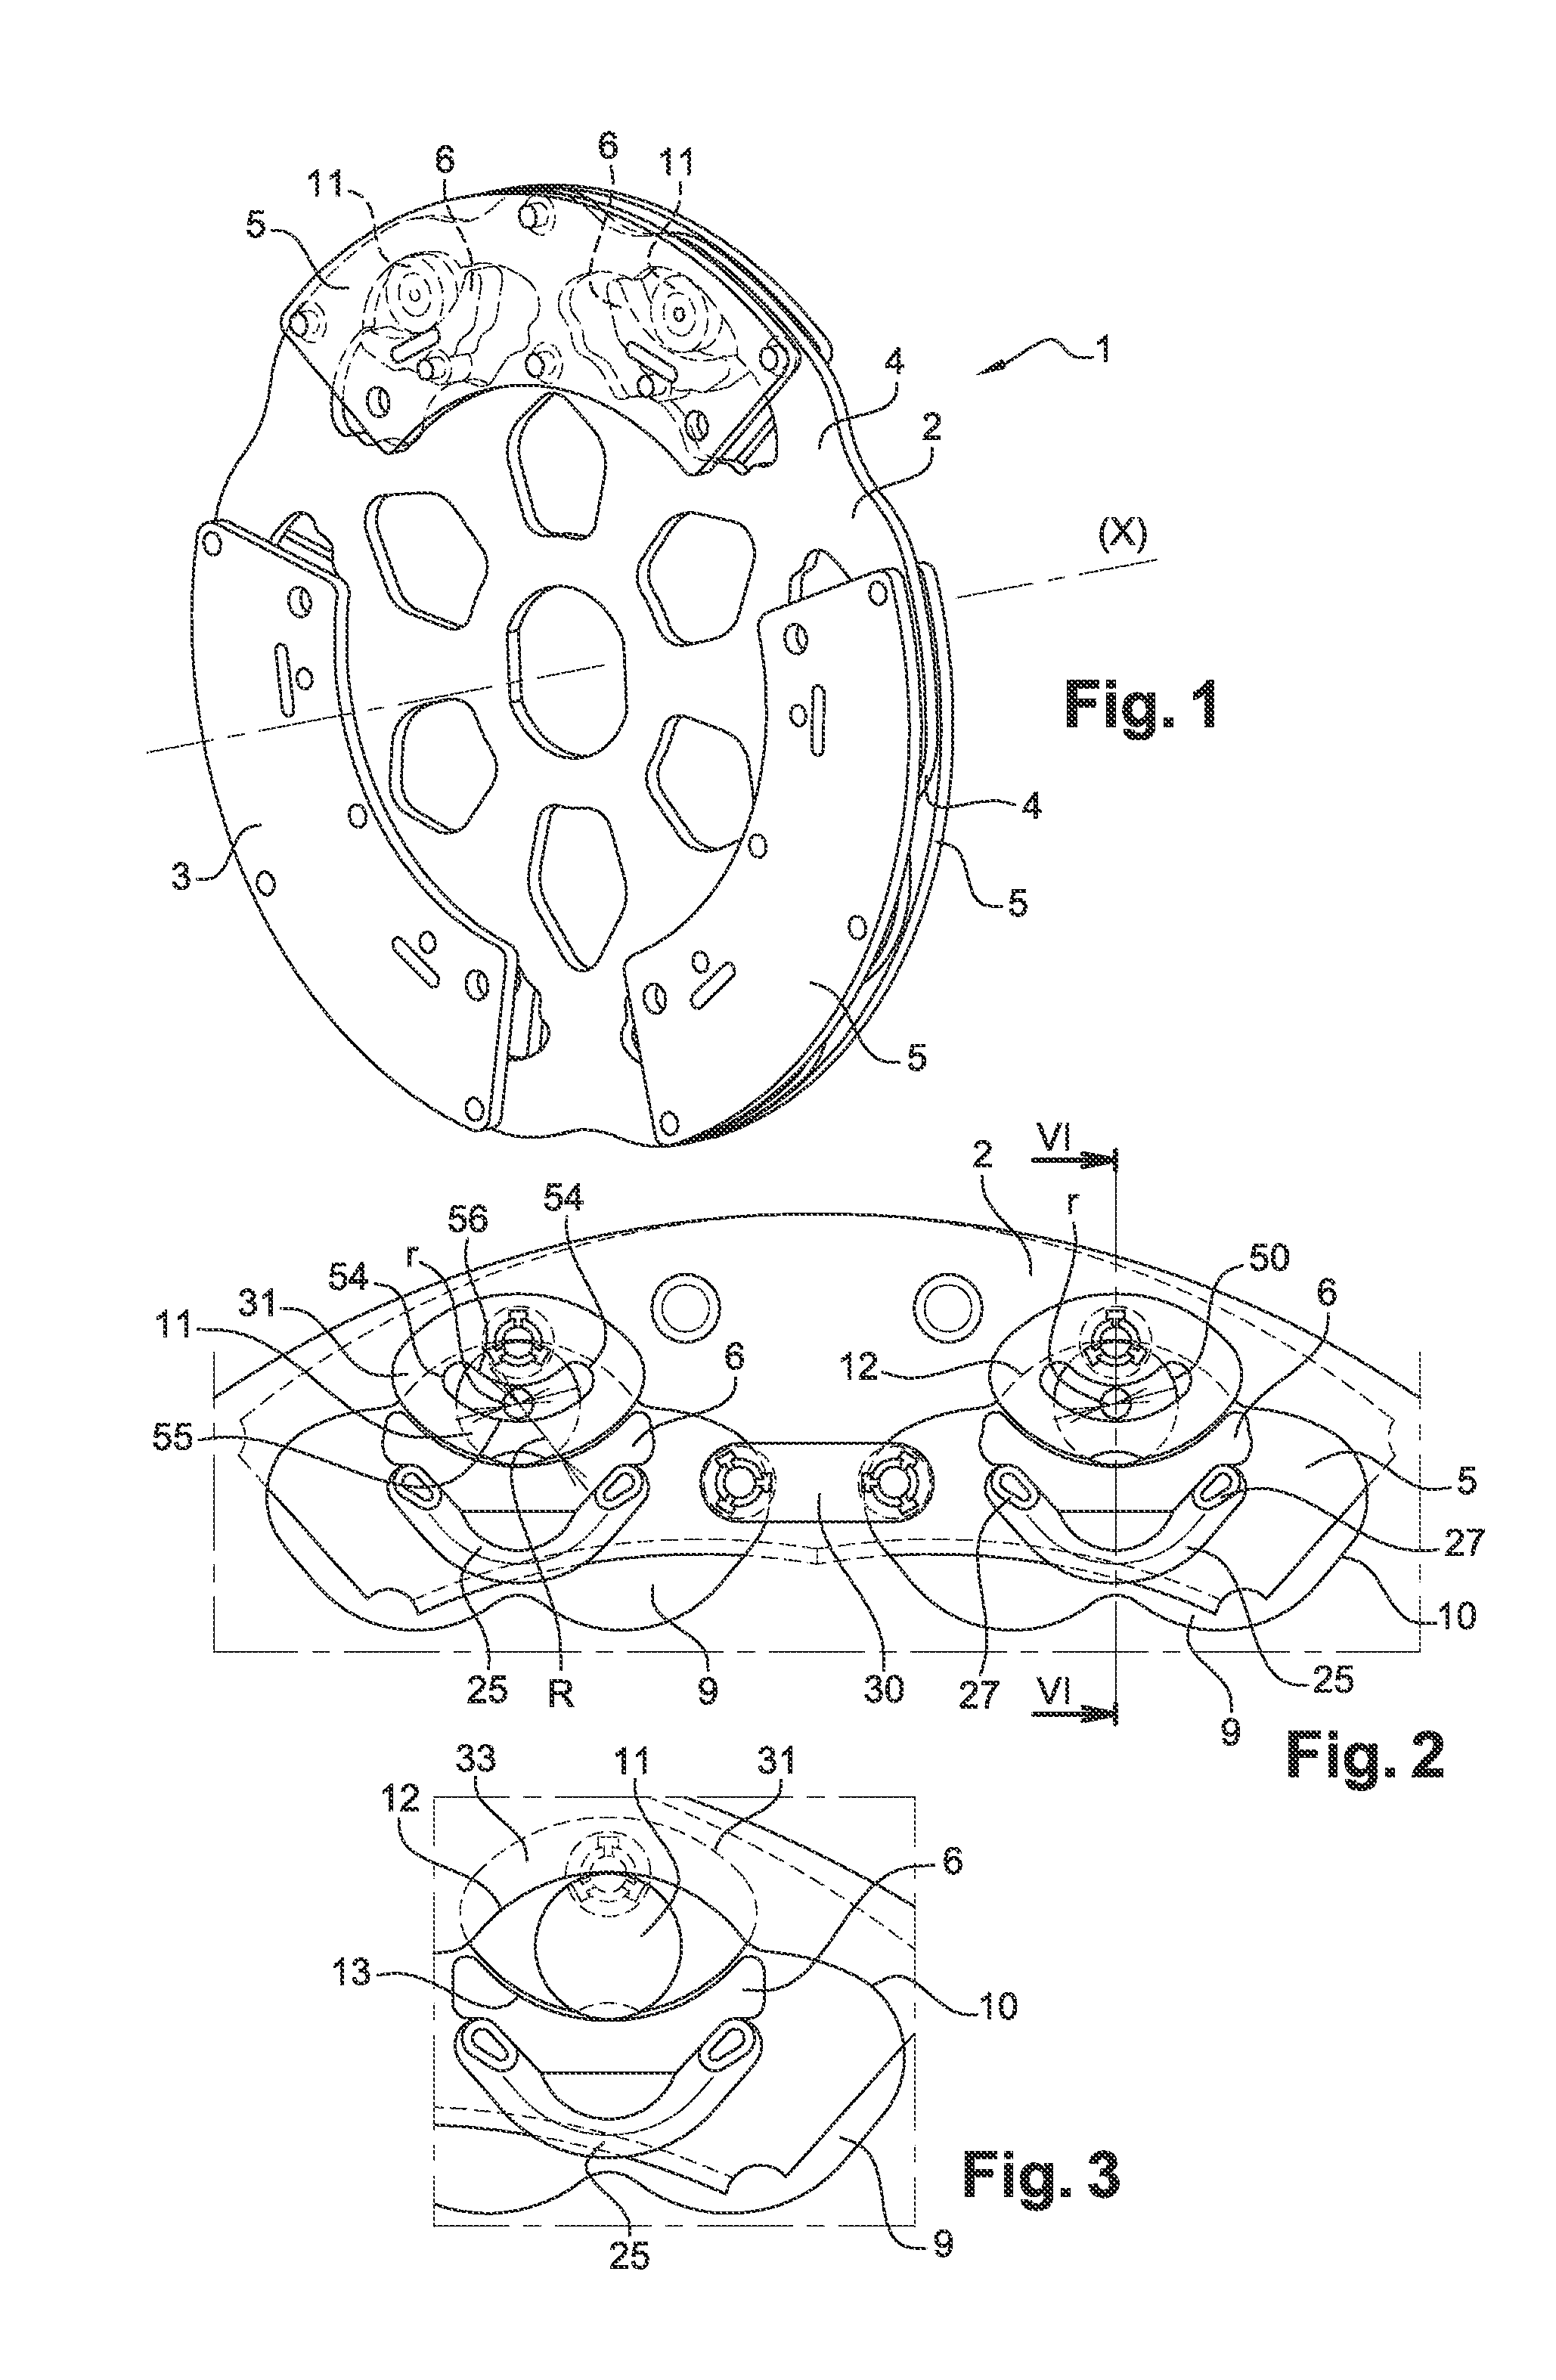 Device for damping torsional oscillations